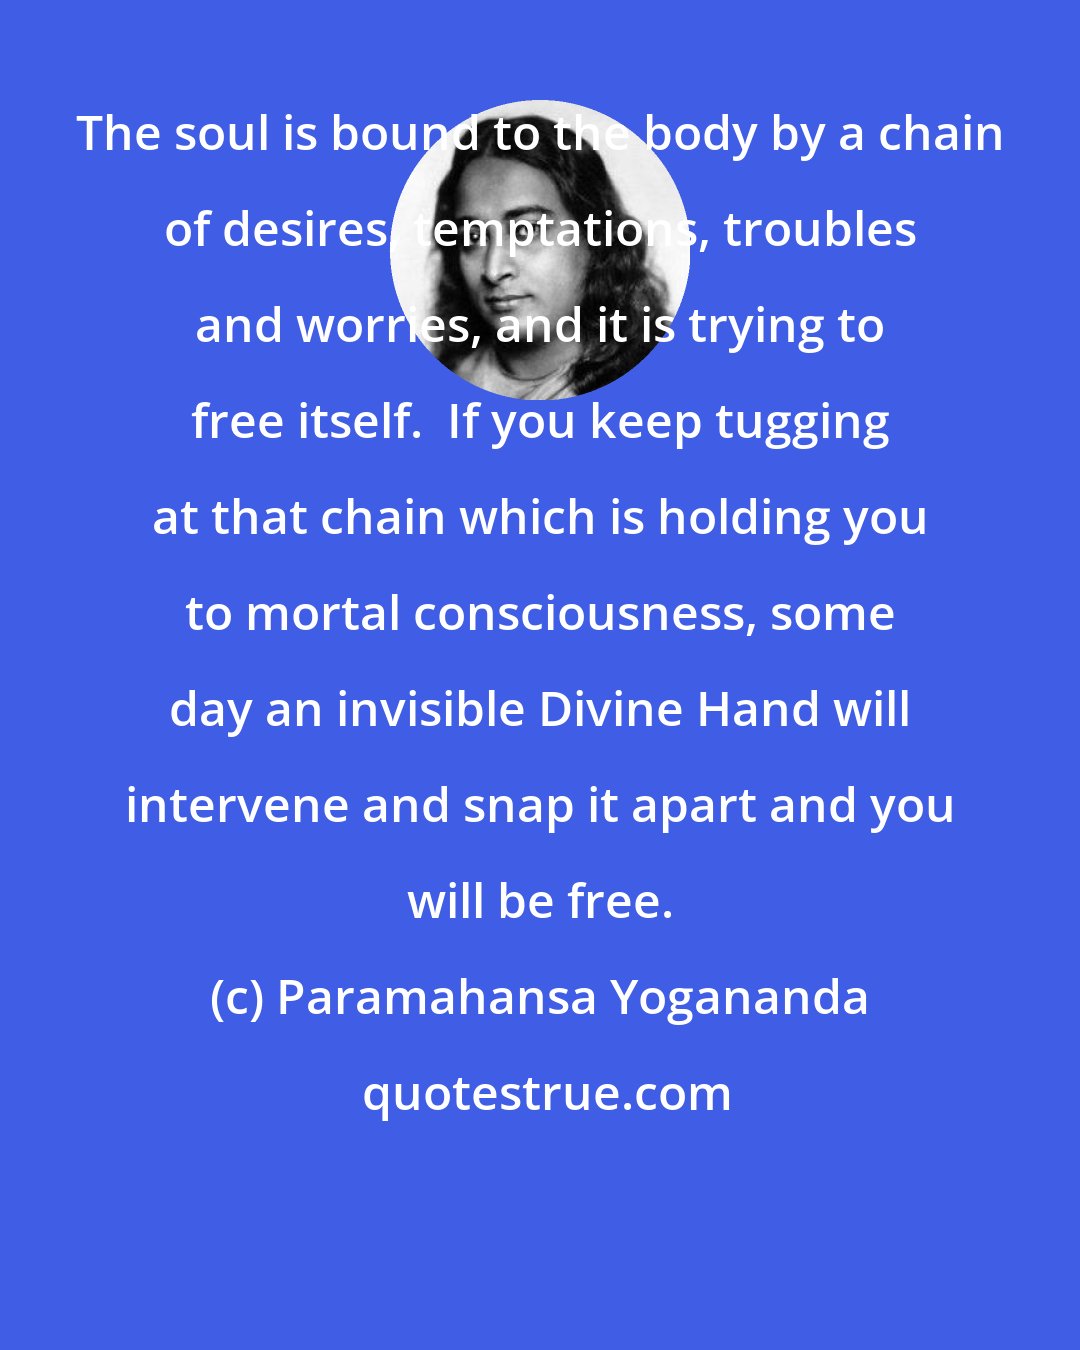 Paramahansa Yogananda: The soul is bound to the body by a chain of desires, temptations, troubles and worries, and it is trying to free itself.  If you keep tugging at that chain which is holding you to mortal consciousness, some day an invisible Divine Hand will intervene and snap it apart and you will be free.